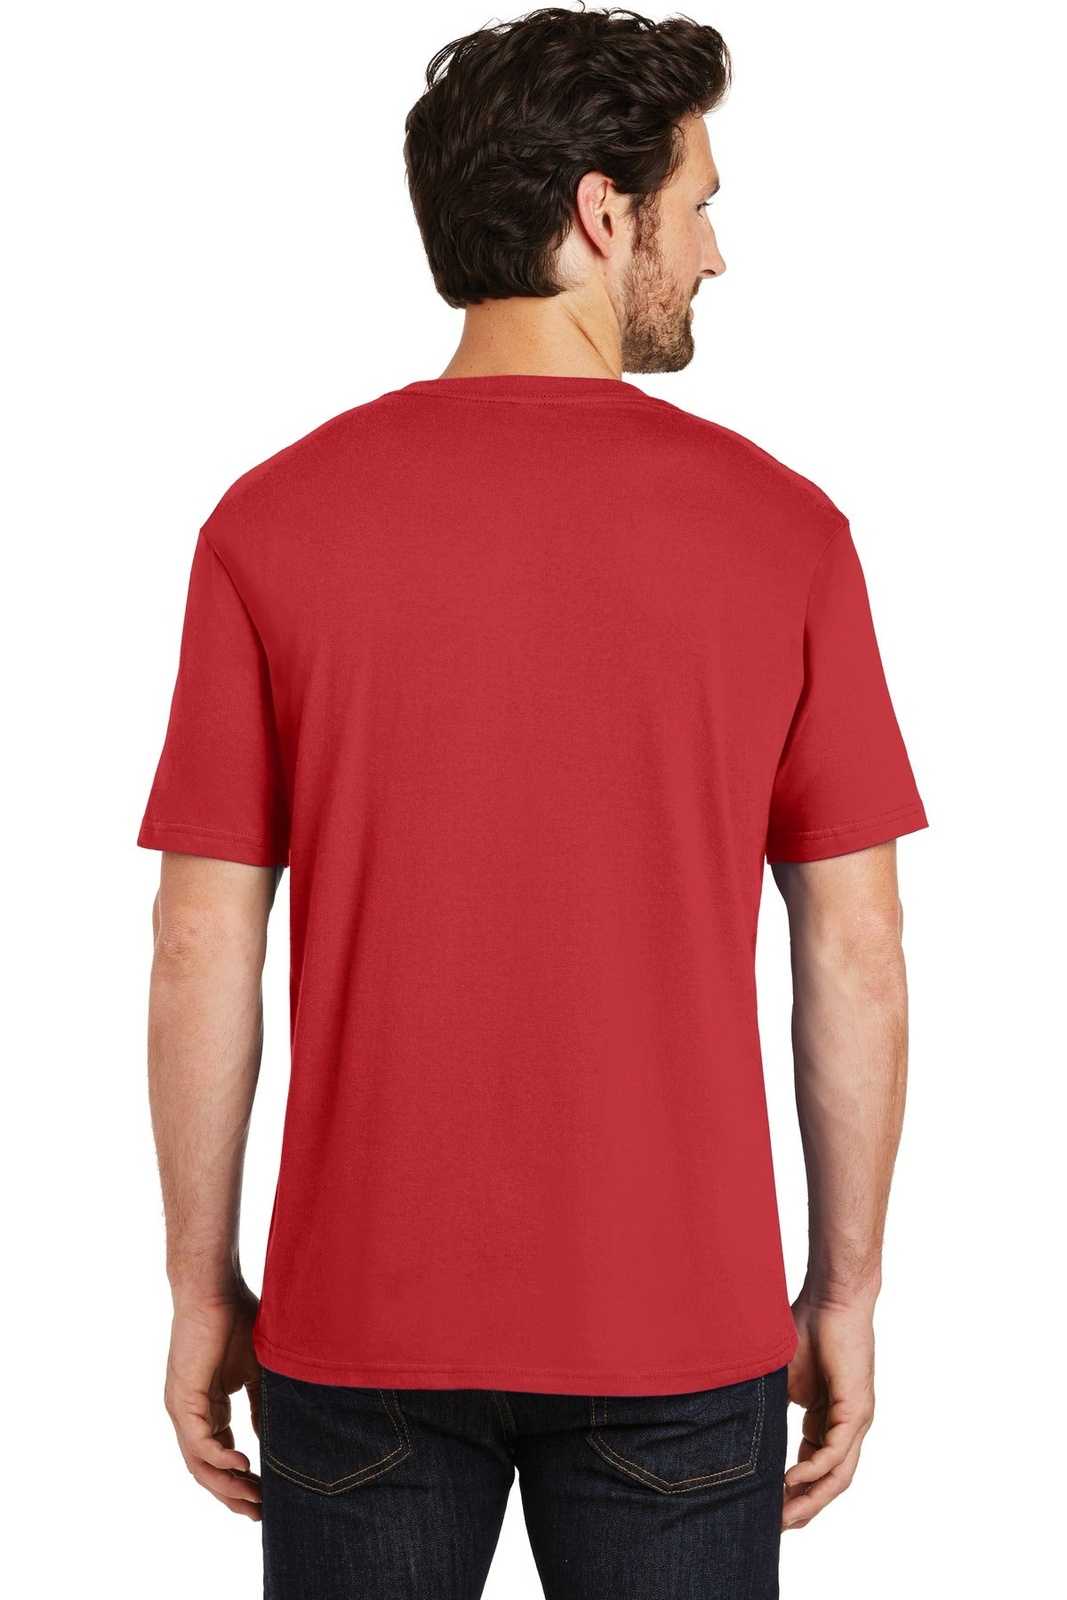 District DT104 Perfect Weight Tee - Classic Red - HIT a Double - 1